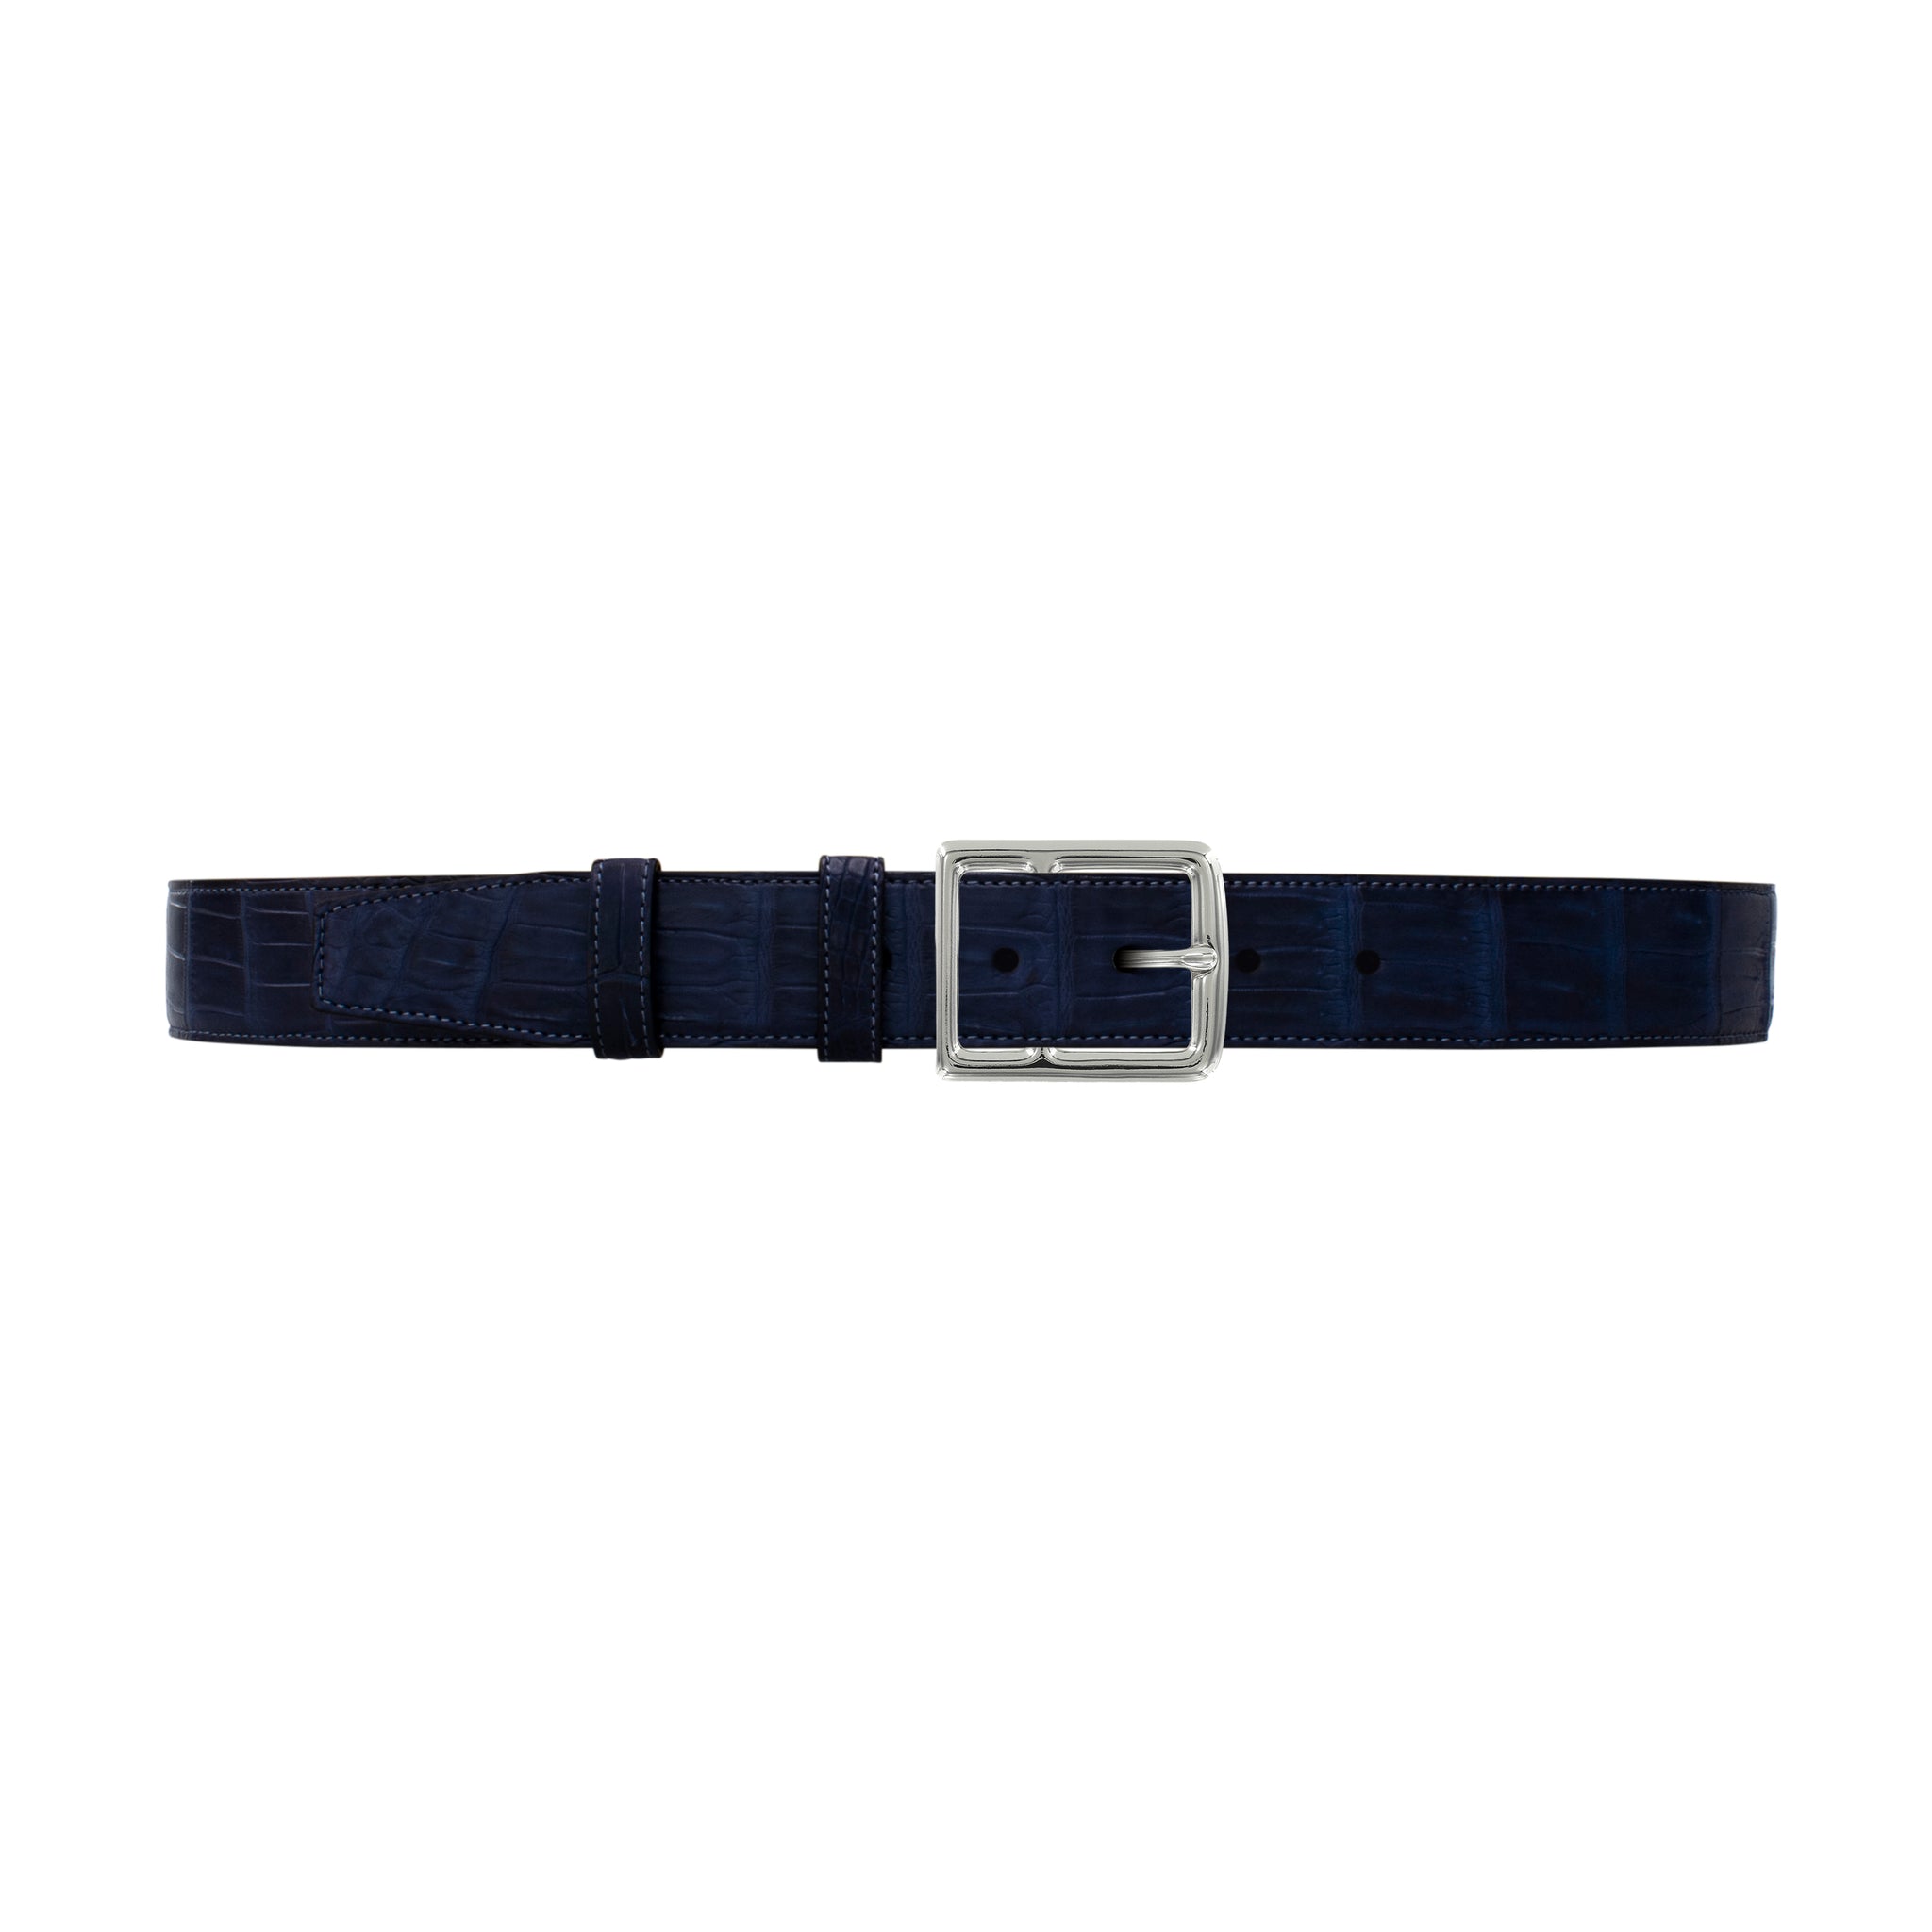 1 1/2" Midnight Classic Belt with Crawford Casual Buckle in Polished Nickel